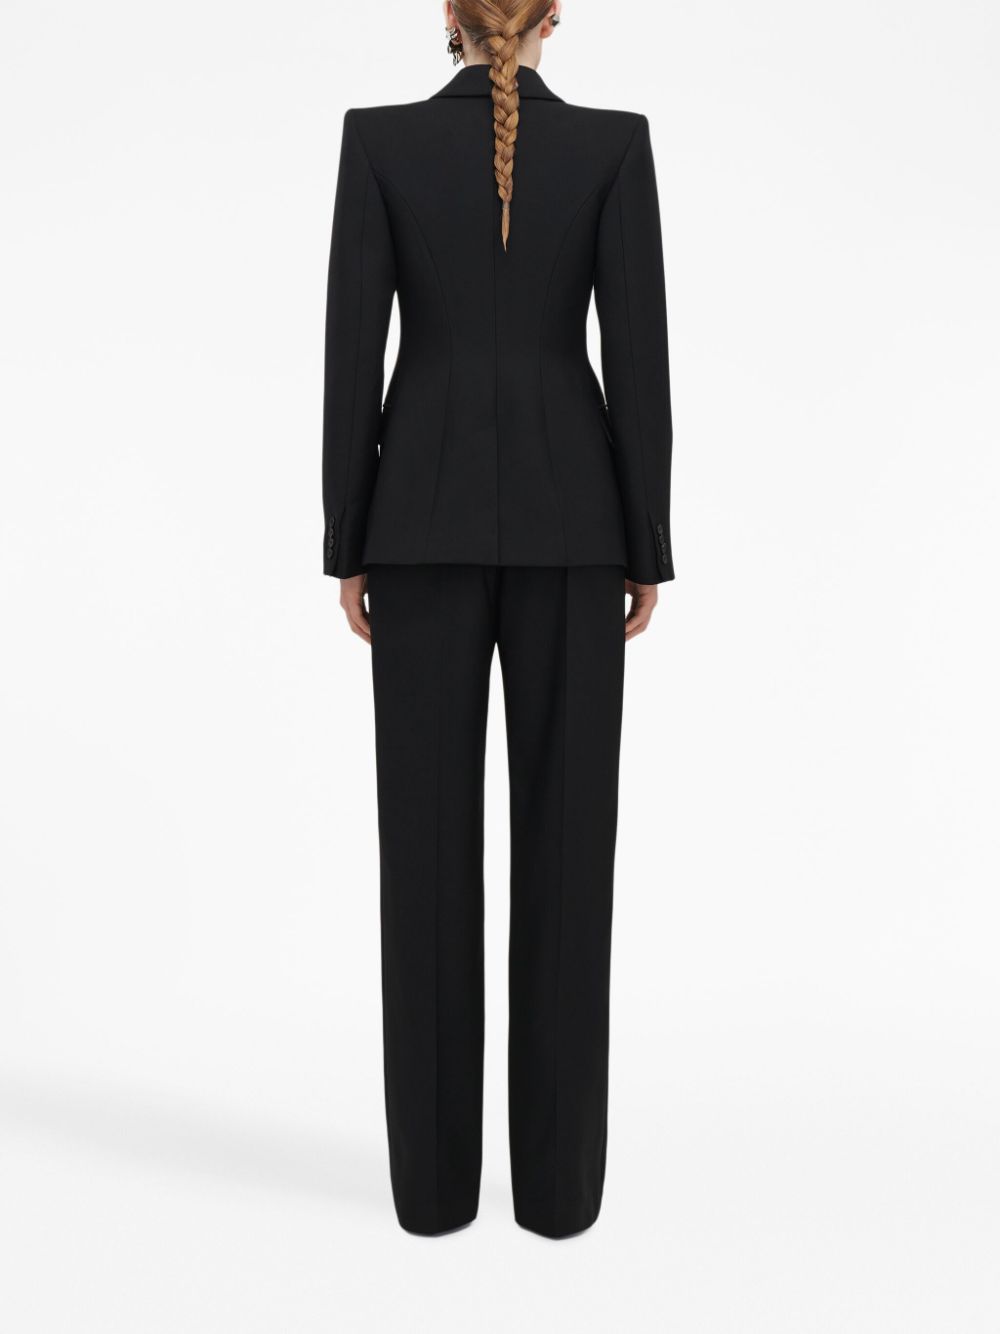 ALEXANDER MCQUEEN Double-Breasted Wool Blazer for Women - FW23 Collection